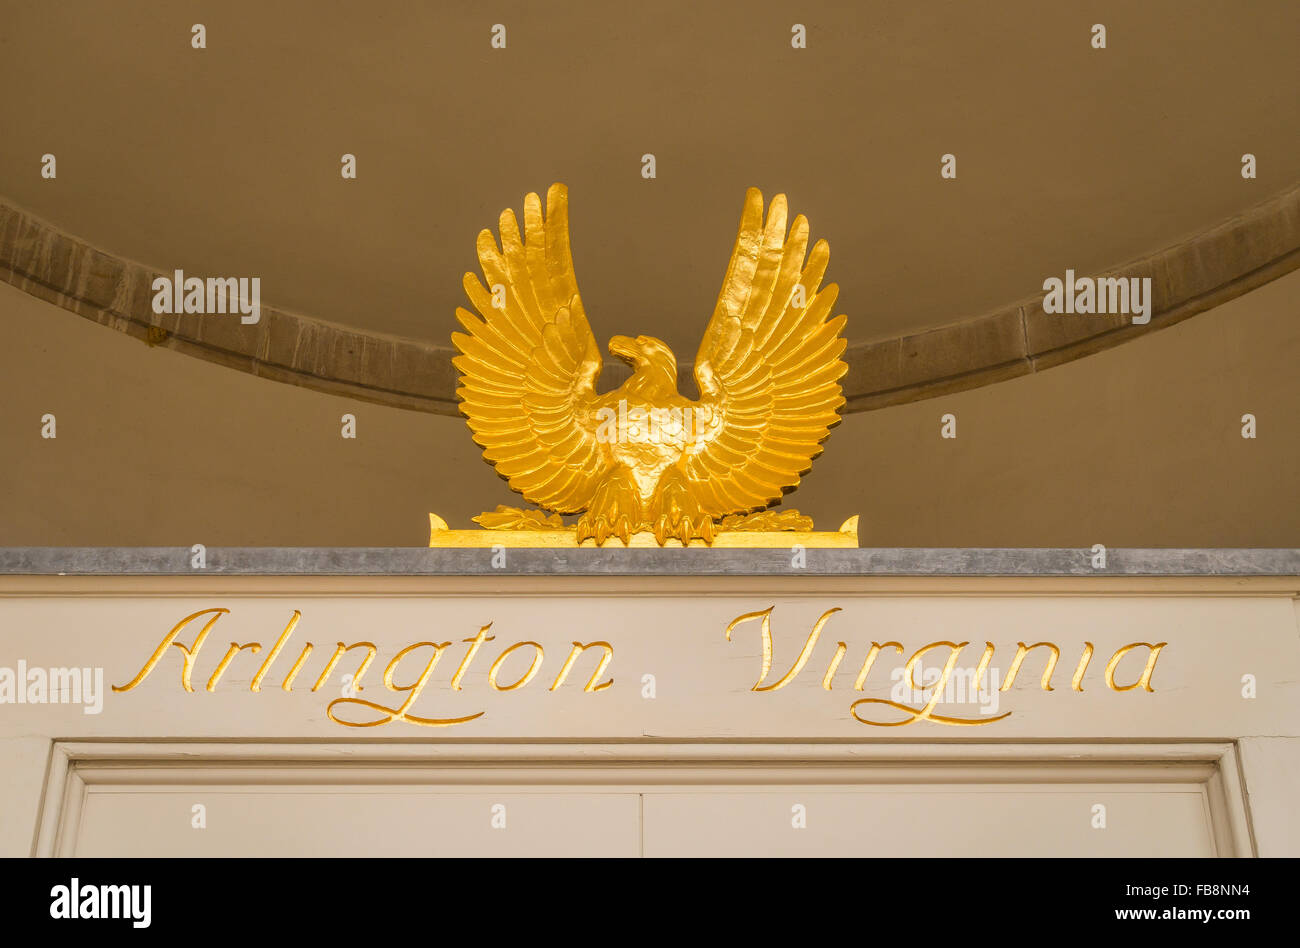 ARLINGTON, VIRGINIA, USA - Gold leaf eagle and name over Post Office door, in Clarendon neighborhood. Stock Photo